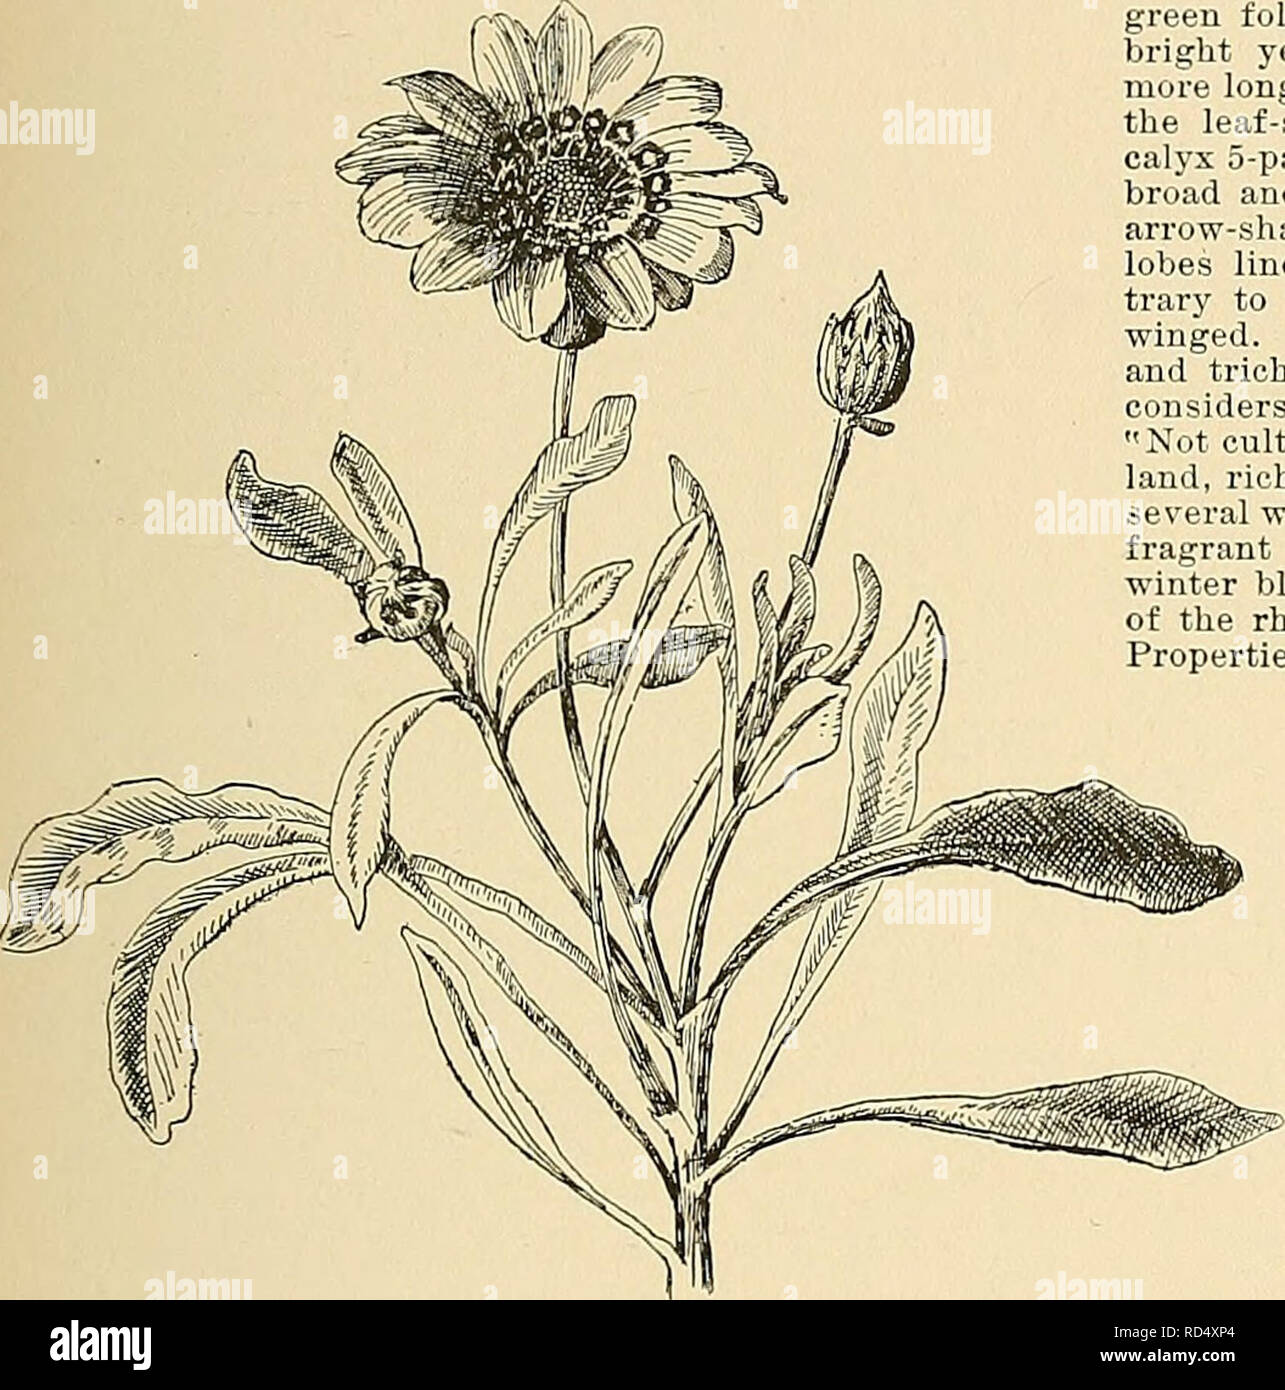 . Cyclopedia of American horticulture, comprising suggestions for cultivation of horticultural plants, descriptions of the species of fruits, vegetables, flowers, and ornamental plants sold in the United States and Canada, together with geographical and biographical sketches. Gardening. GAZANIA GENISTA 631 lobes. B.M. 90 shows a head of scarlet rays, with basal markings of brown, black and white. CO. Basal markings without brown. spl^ndens, Hort. Fig. 895. Hybrid, said to resemble G. iniiflora in habit but dwarfer and more compact. Of the kinds in common cult, it is nearest to G. Pavonia in co Stock Photo